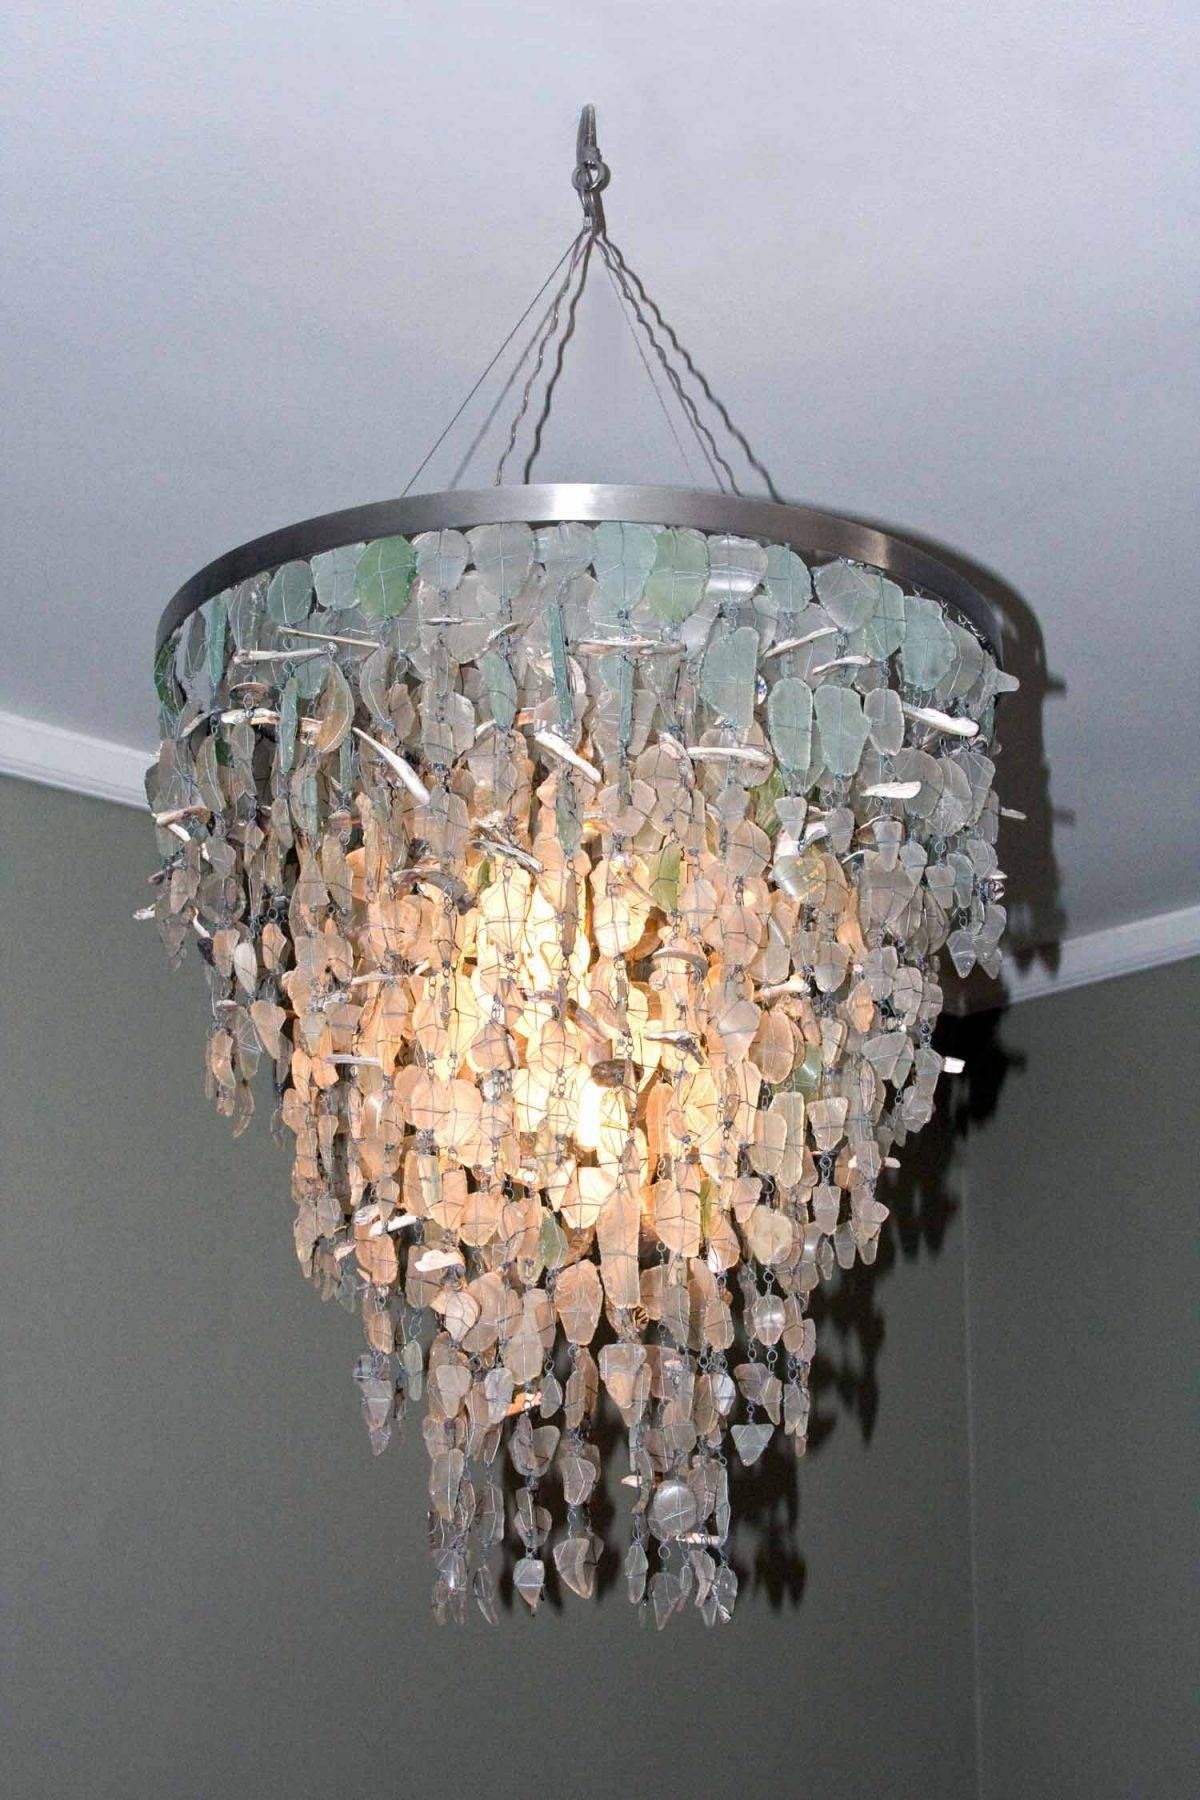 African Lighting & Fixtures | Phases Africa | African Decor Within Recycled Glass Lights Fixtures (View 1 of 15)